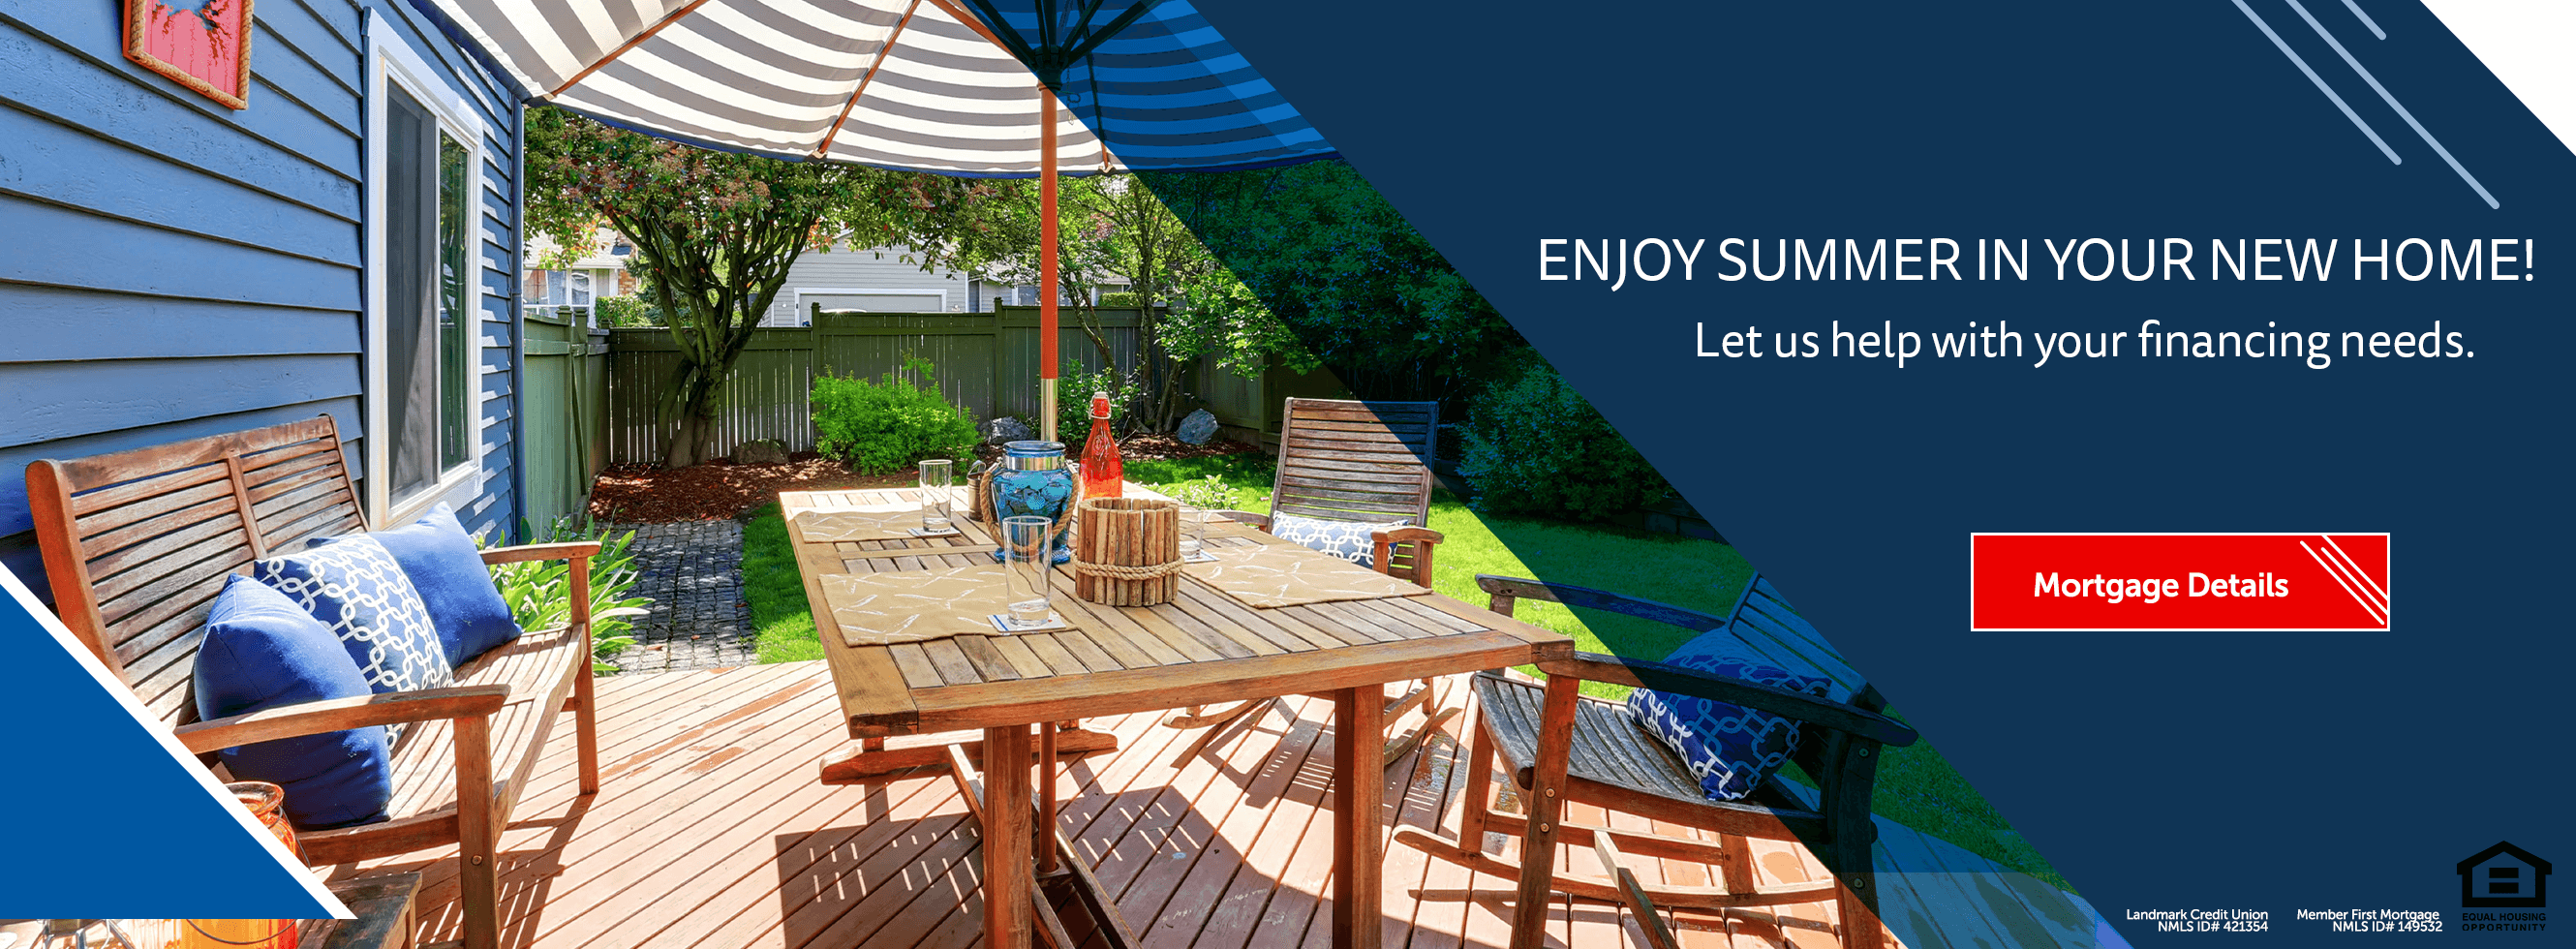 Enjoy Summer In Your New home!